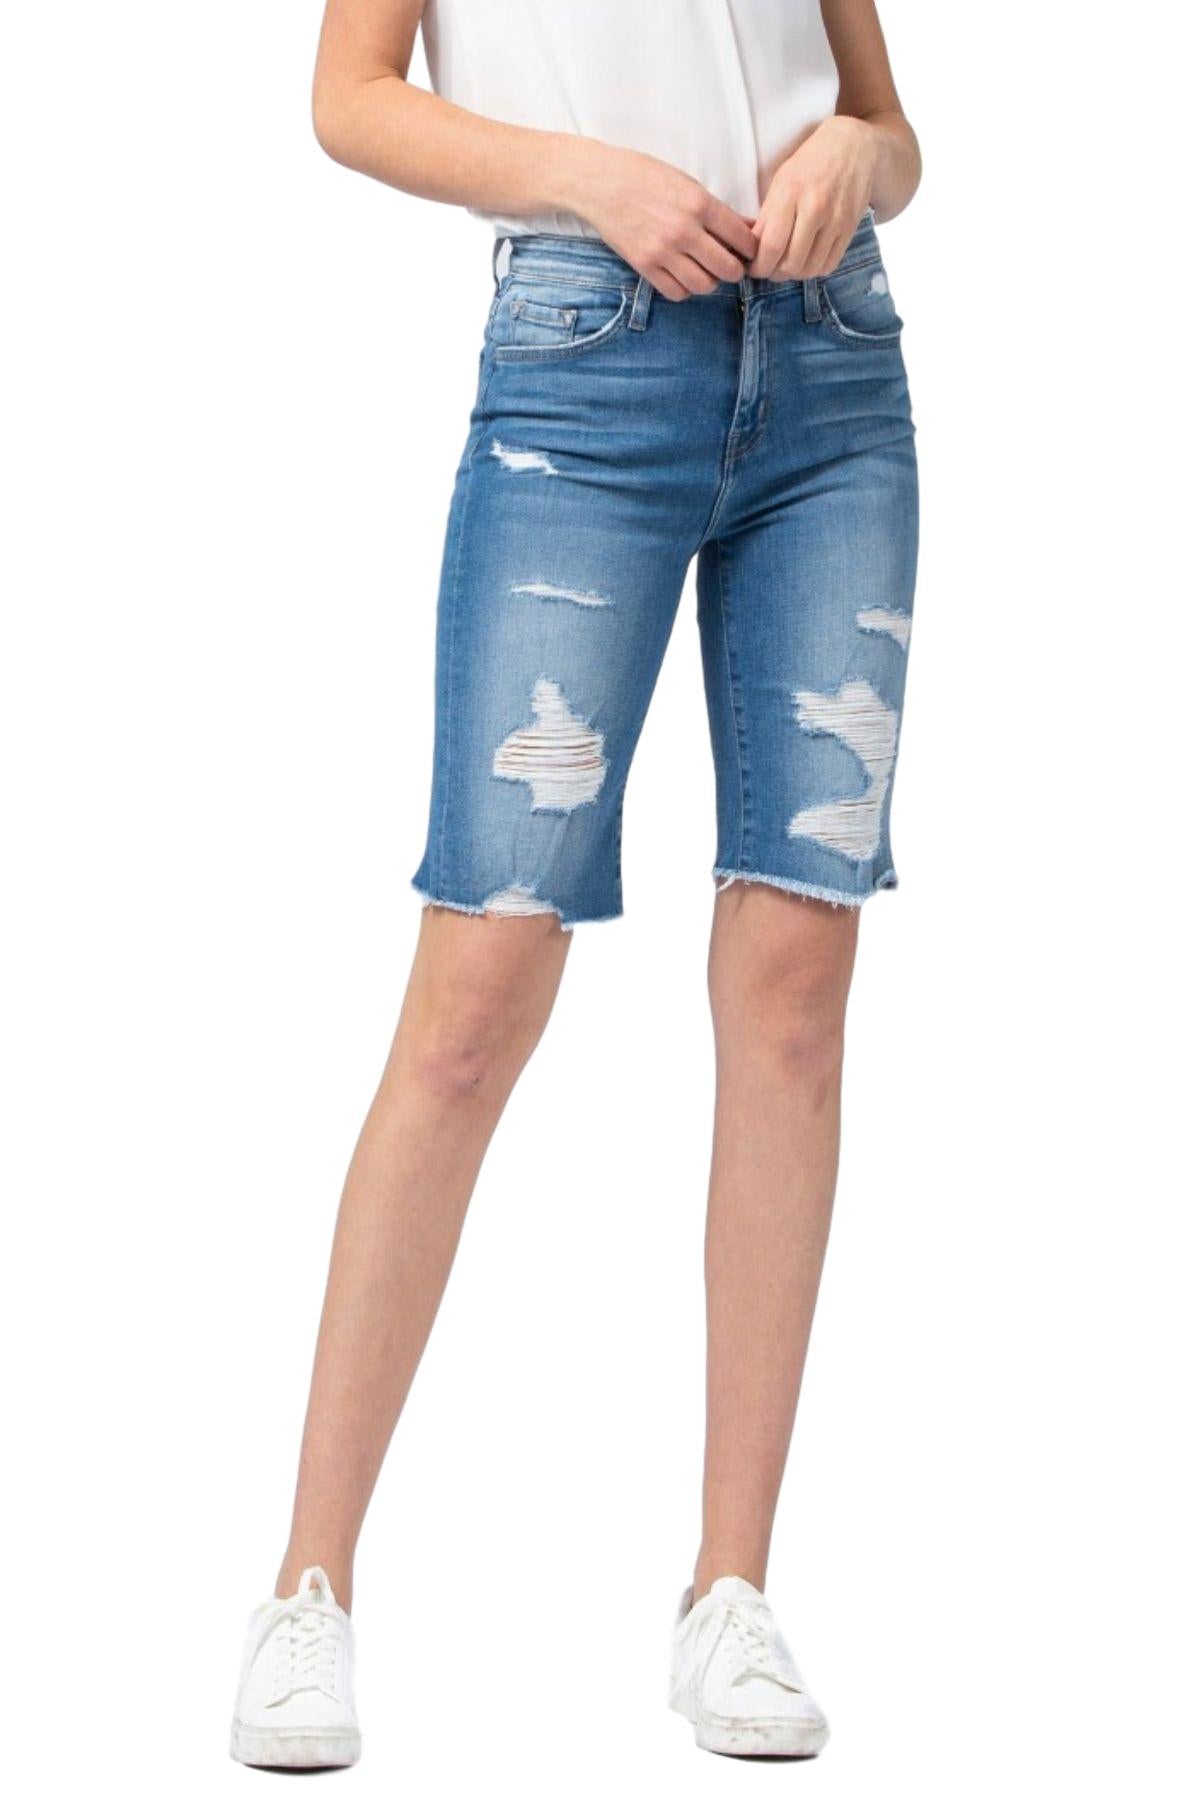 Flying Monkey Jeans  Instantaneous High Rise Shorts F4694